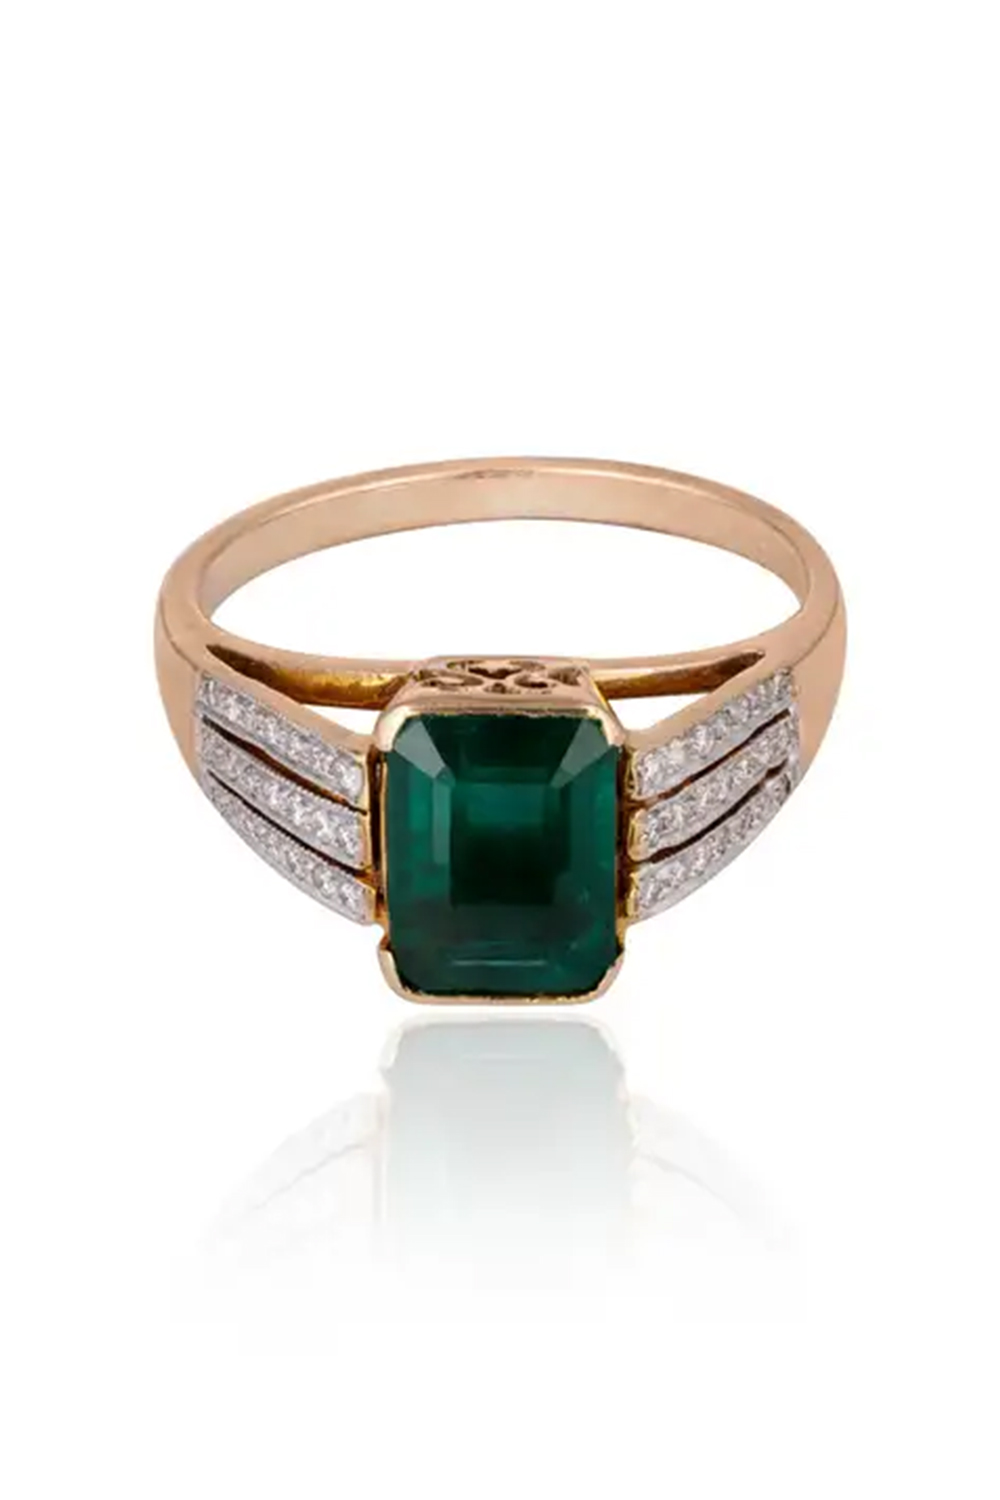 0.15cts Diamond & 2.25cts Emerald gold Ring